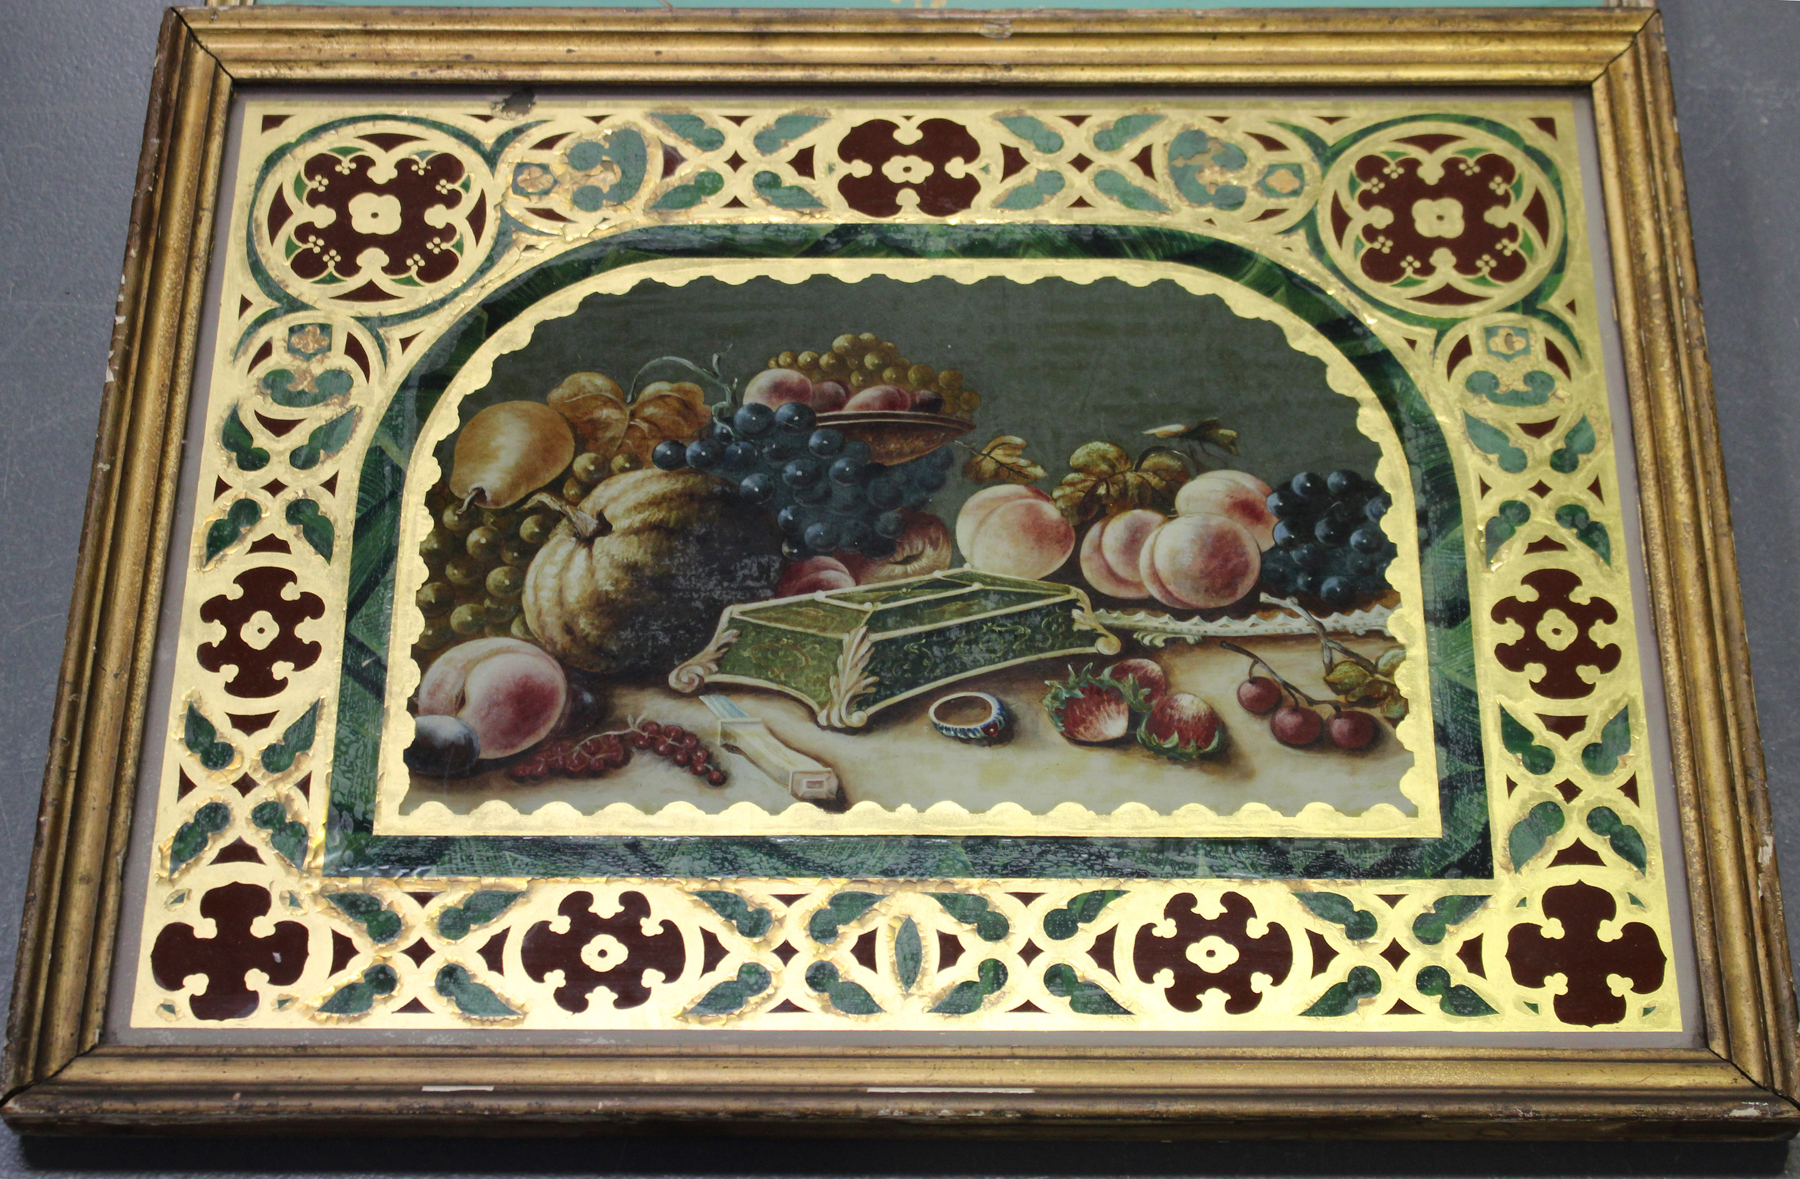 A 19th century French reverse painting on glass depicting a still life within a gilded strapwork